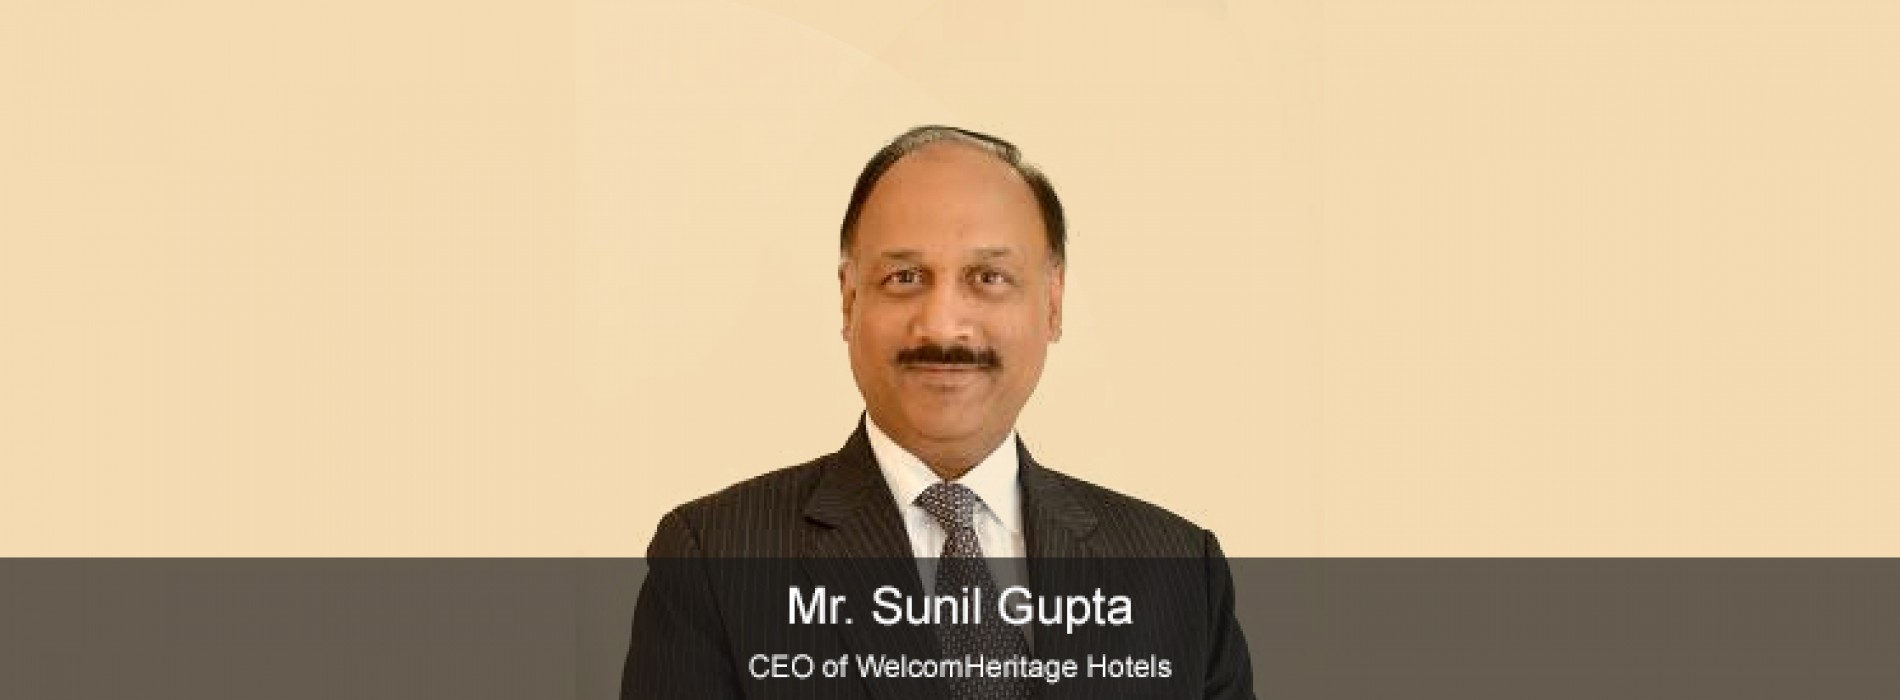 WelcomHeritage Hotels has a new CEO